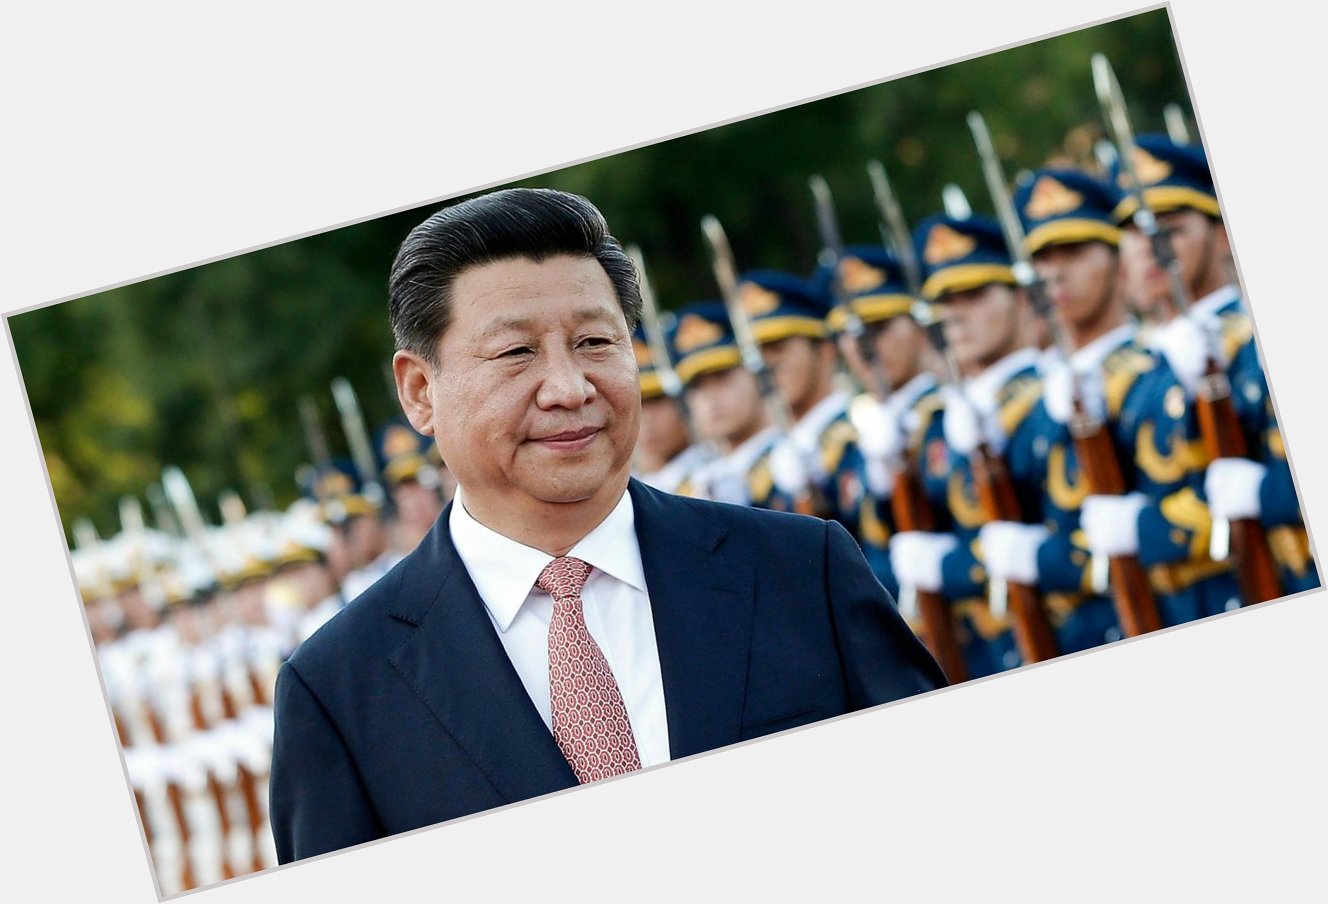 Happy Birthday to Xi Jinping,
The General Secretary of the Communist Party of China. 